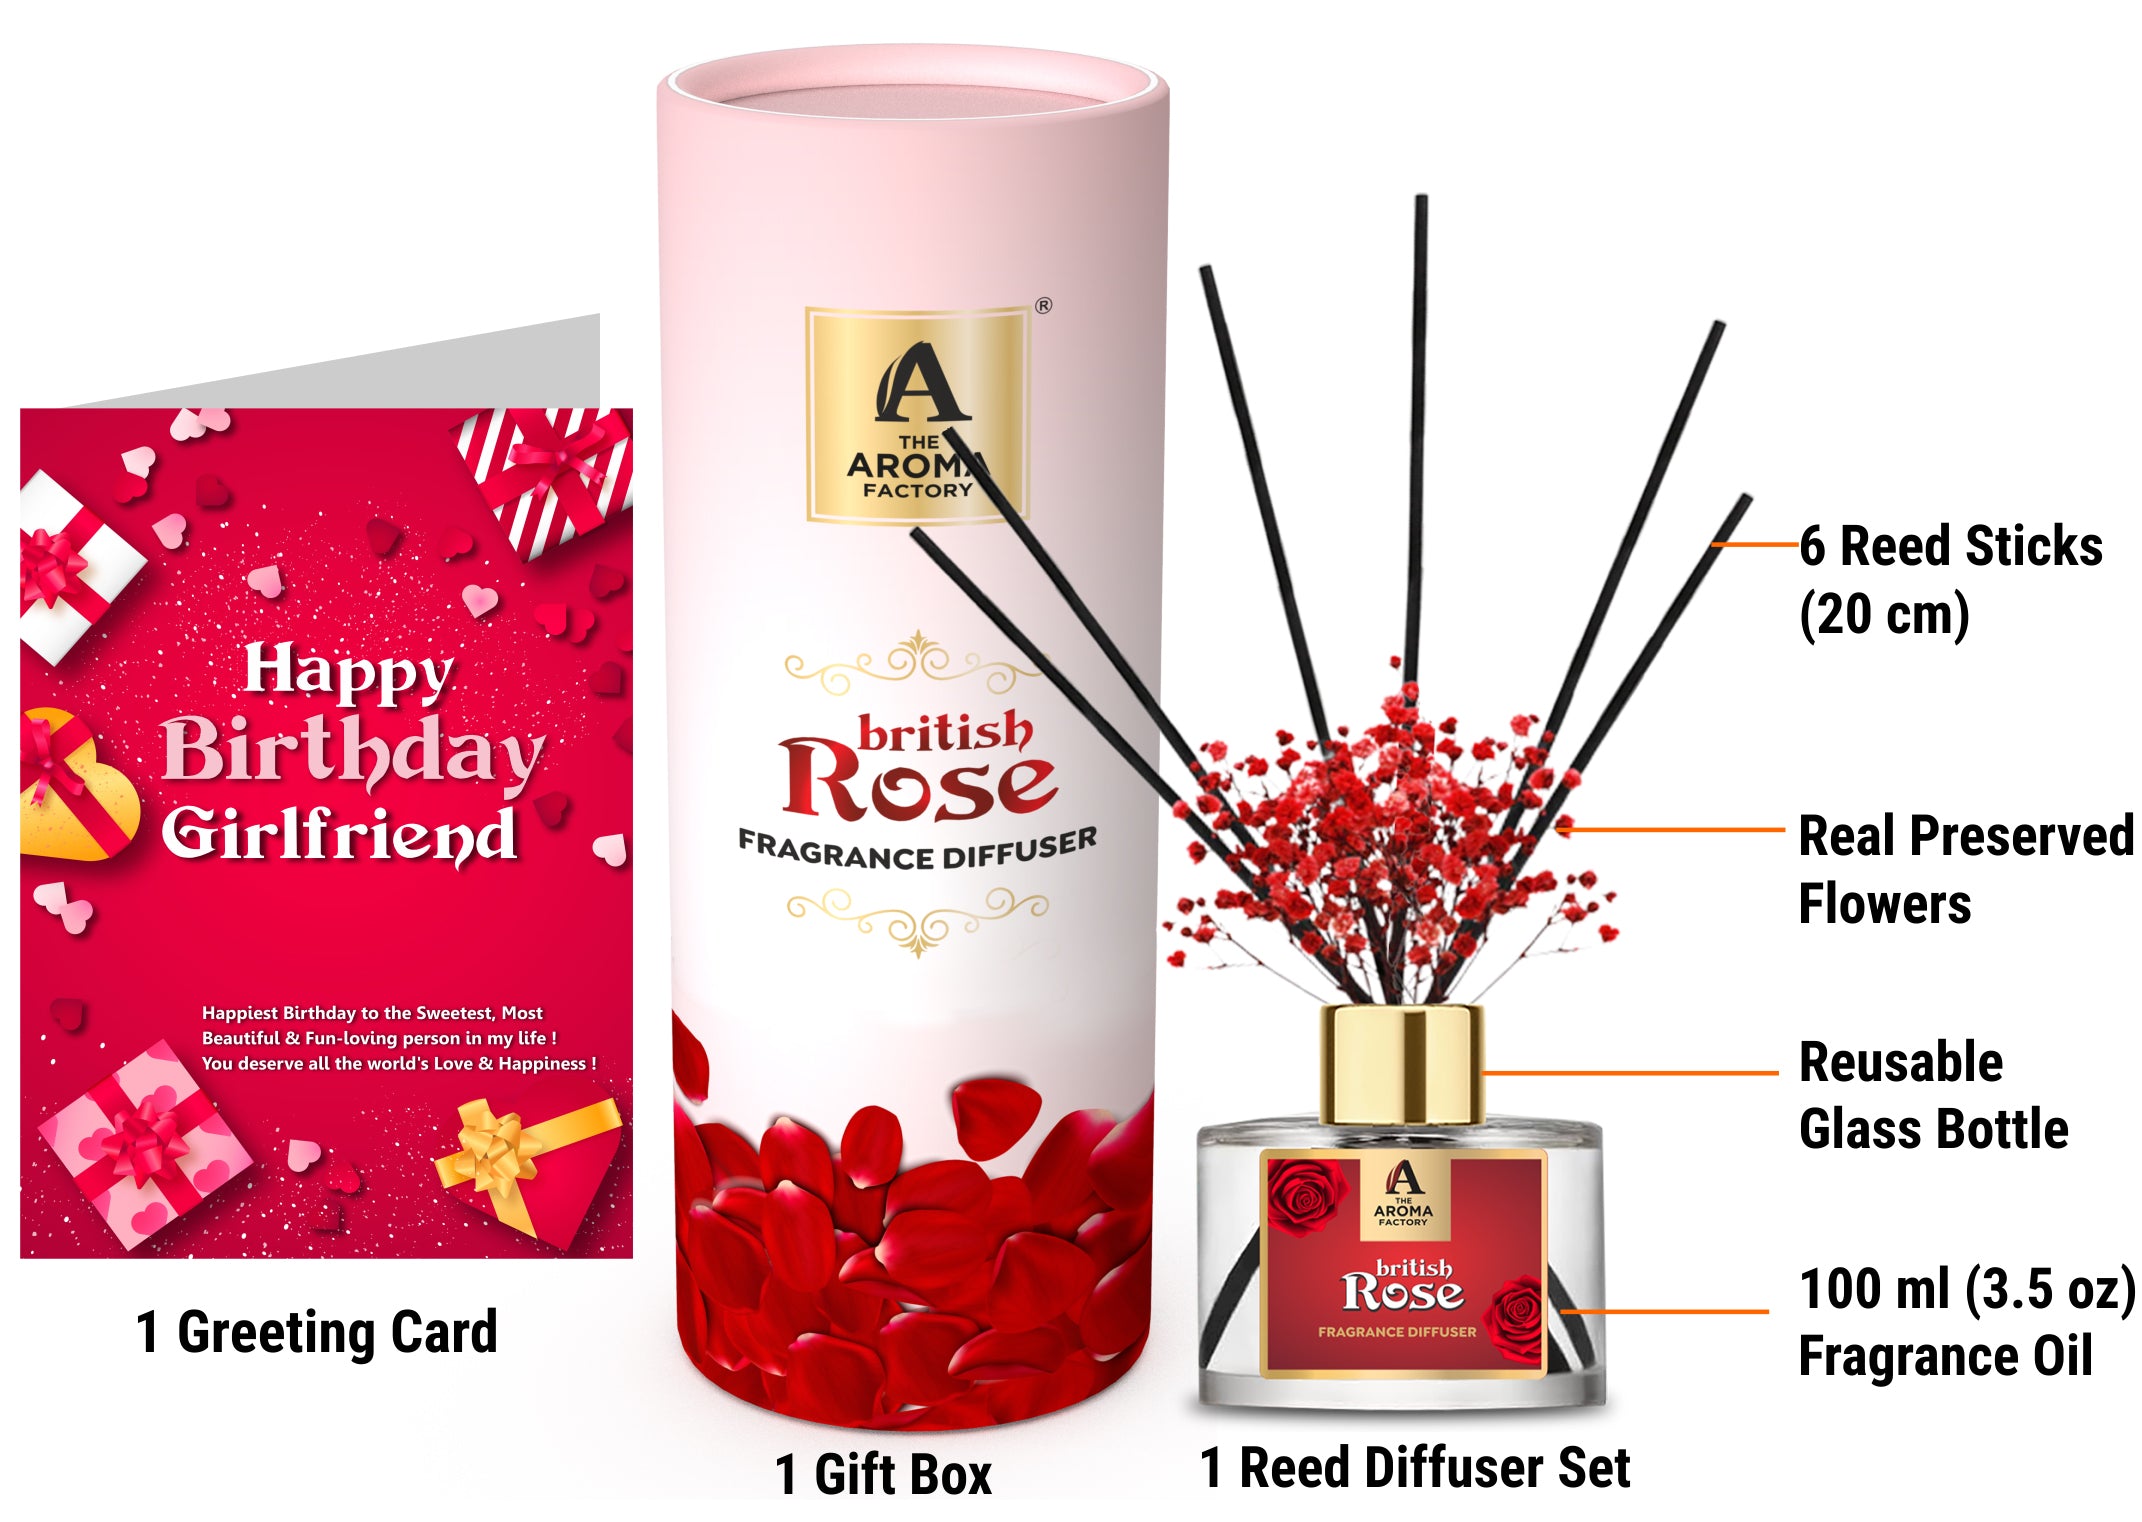 The Aroma Factory Happy Birthday Girl Friend Gift with Card, British Rose Fragrance Reed Diffuser Set (1 Box + 1 Card)